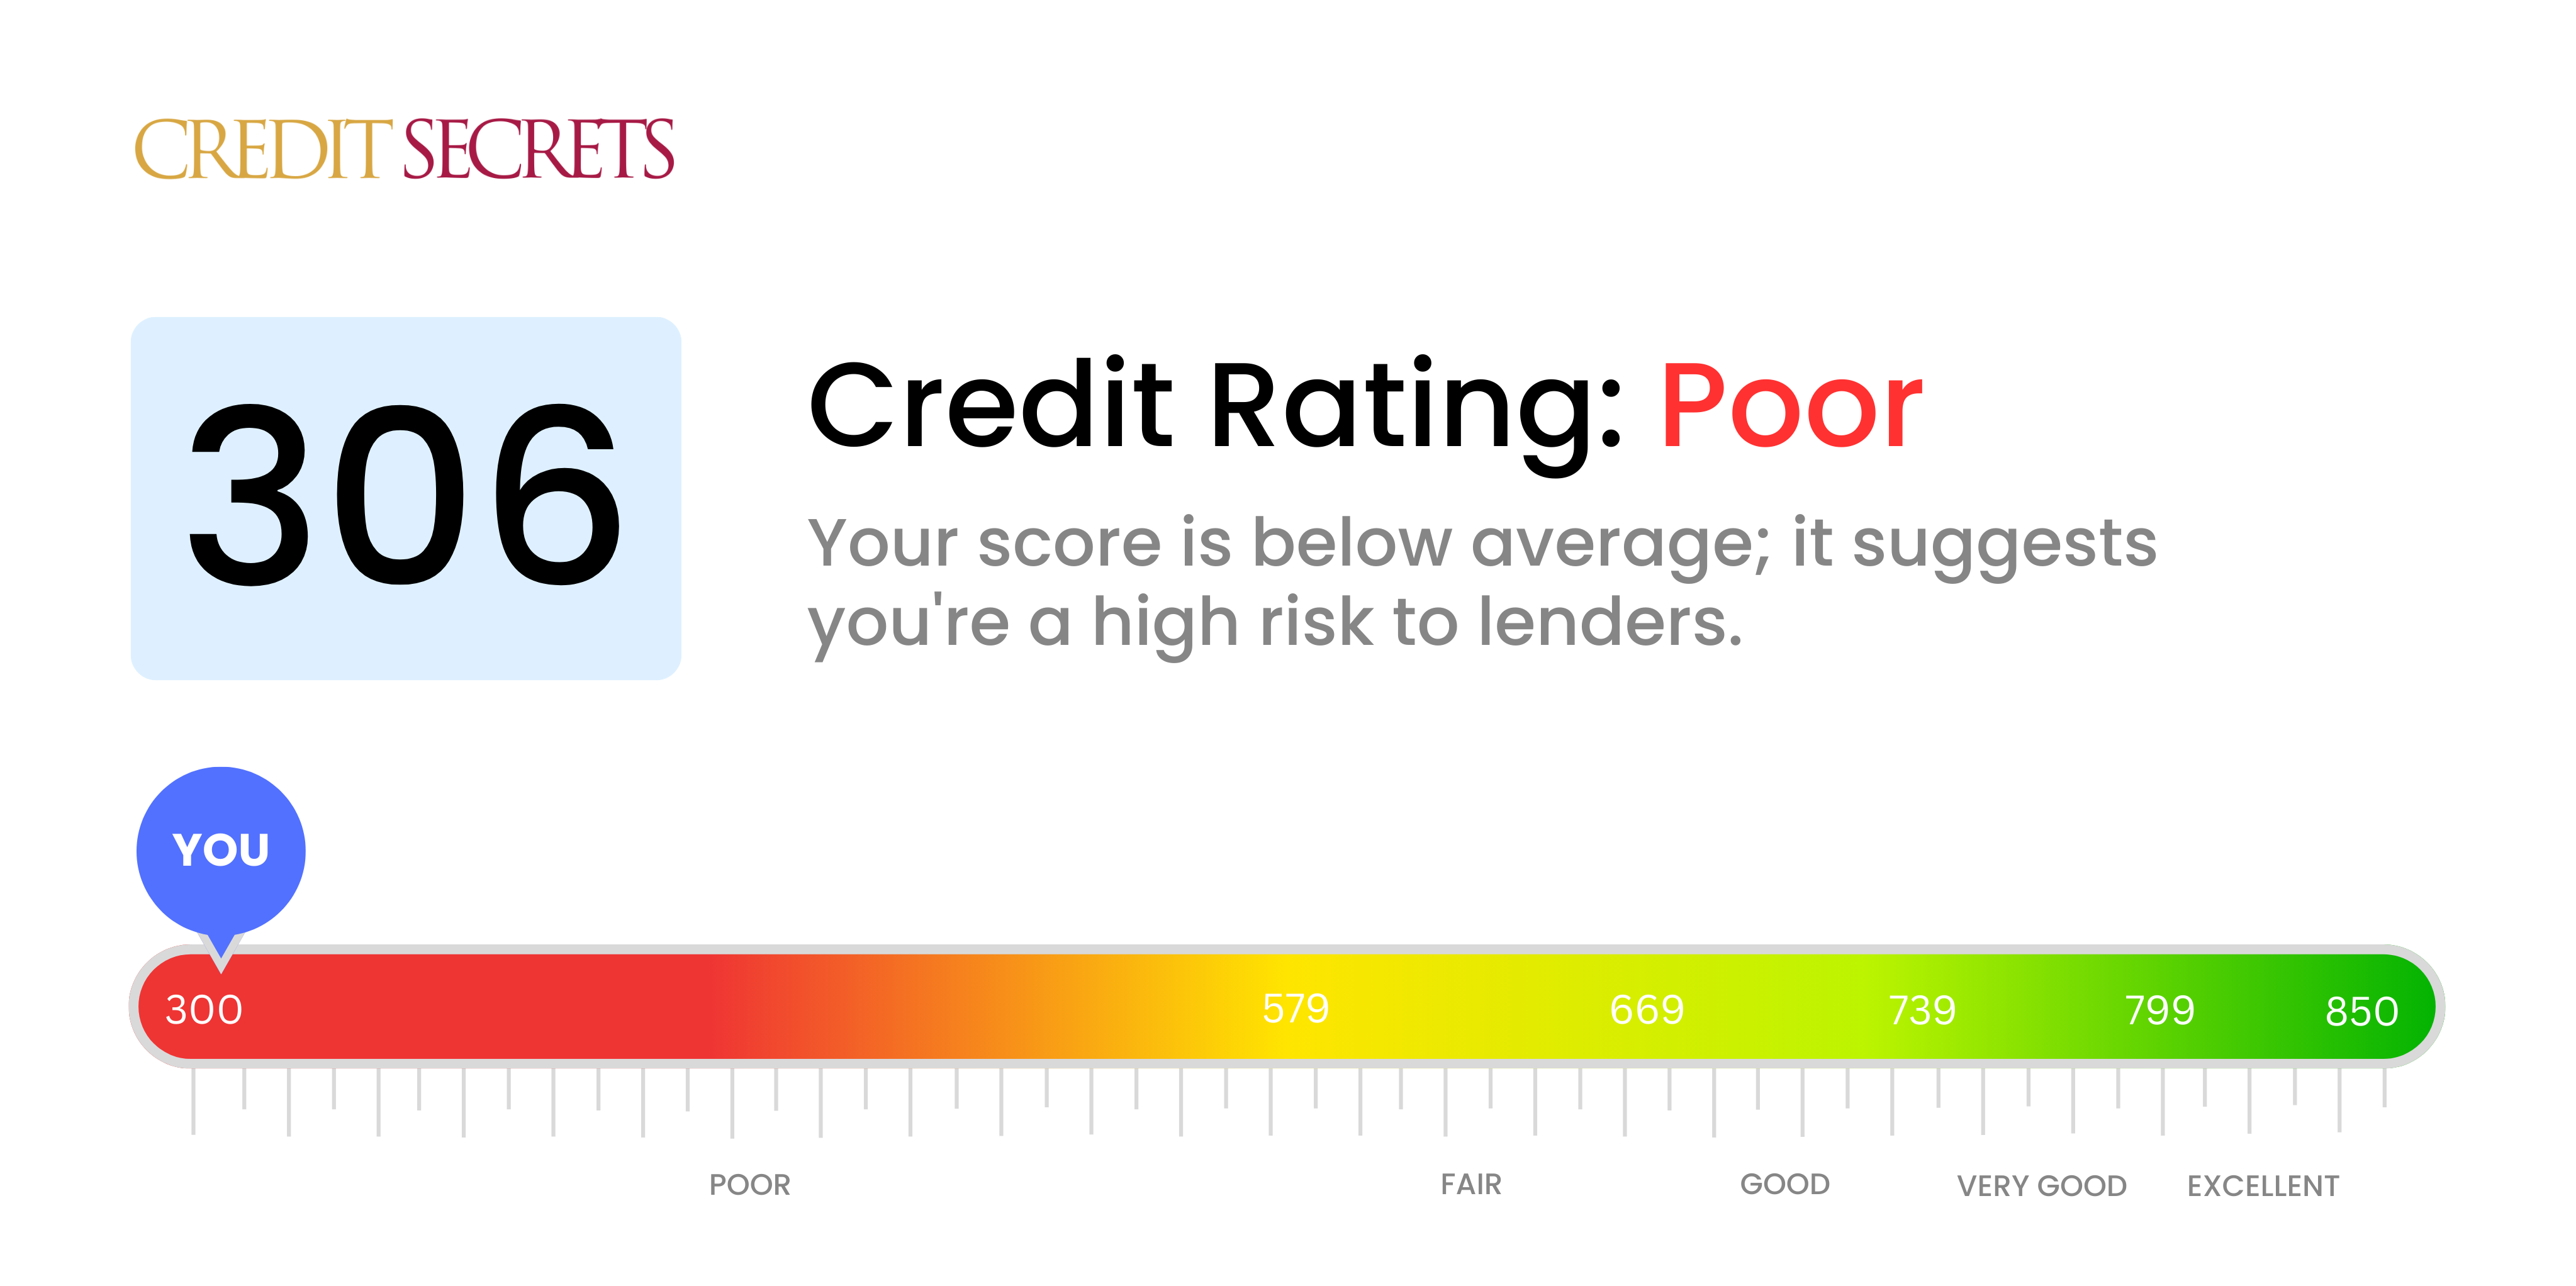 Is 306 a good credit score?